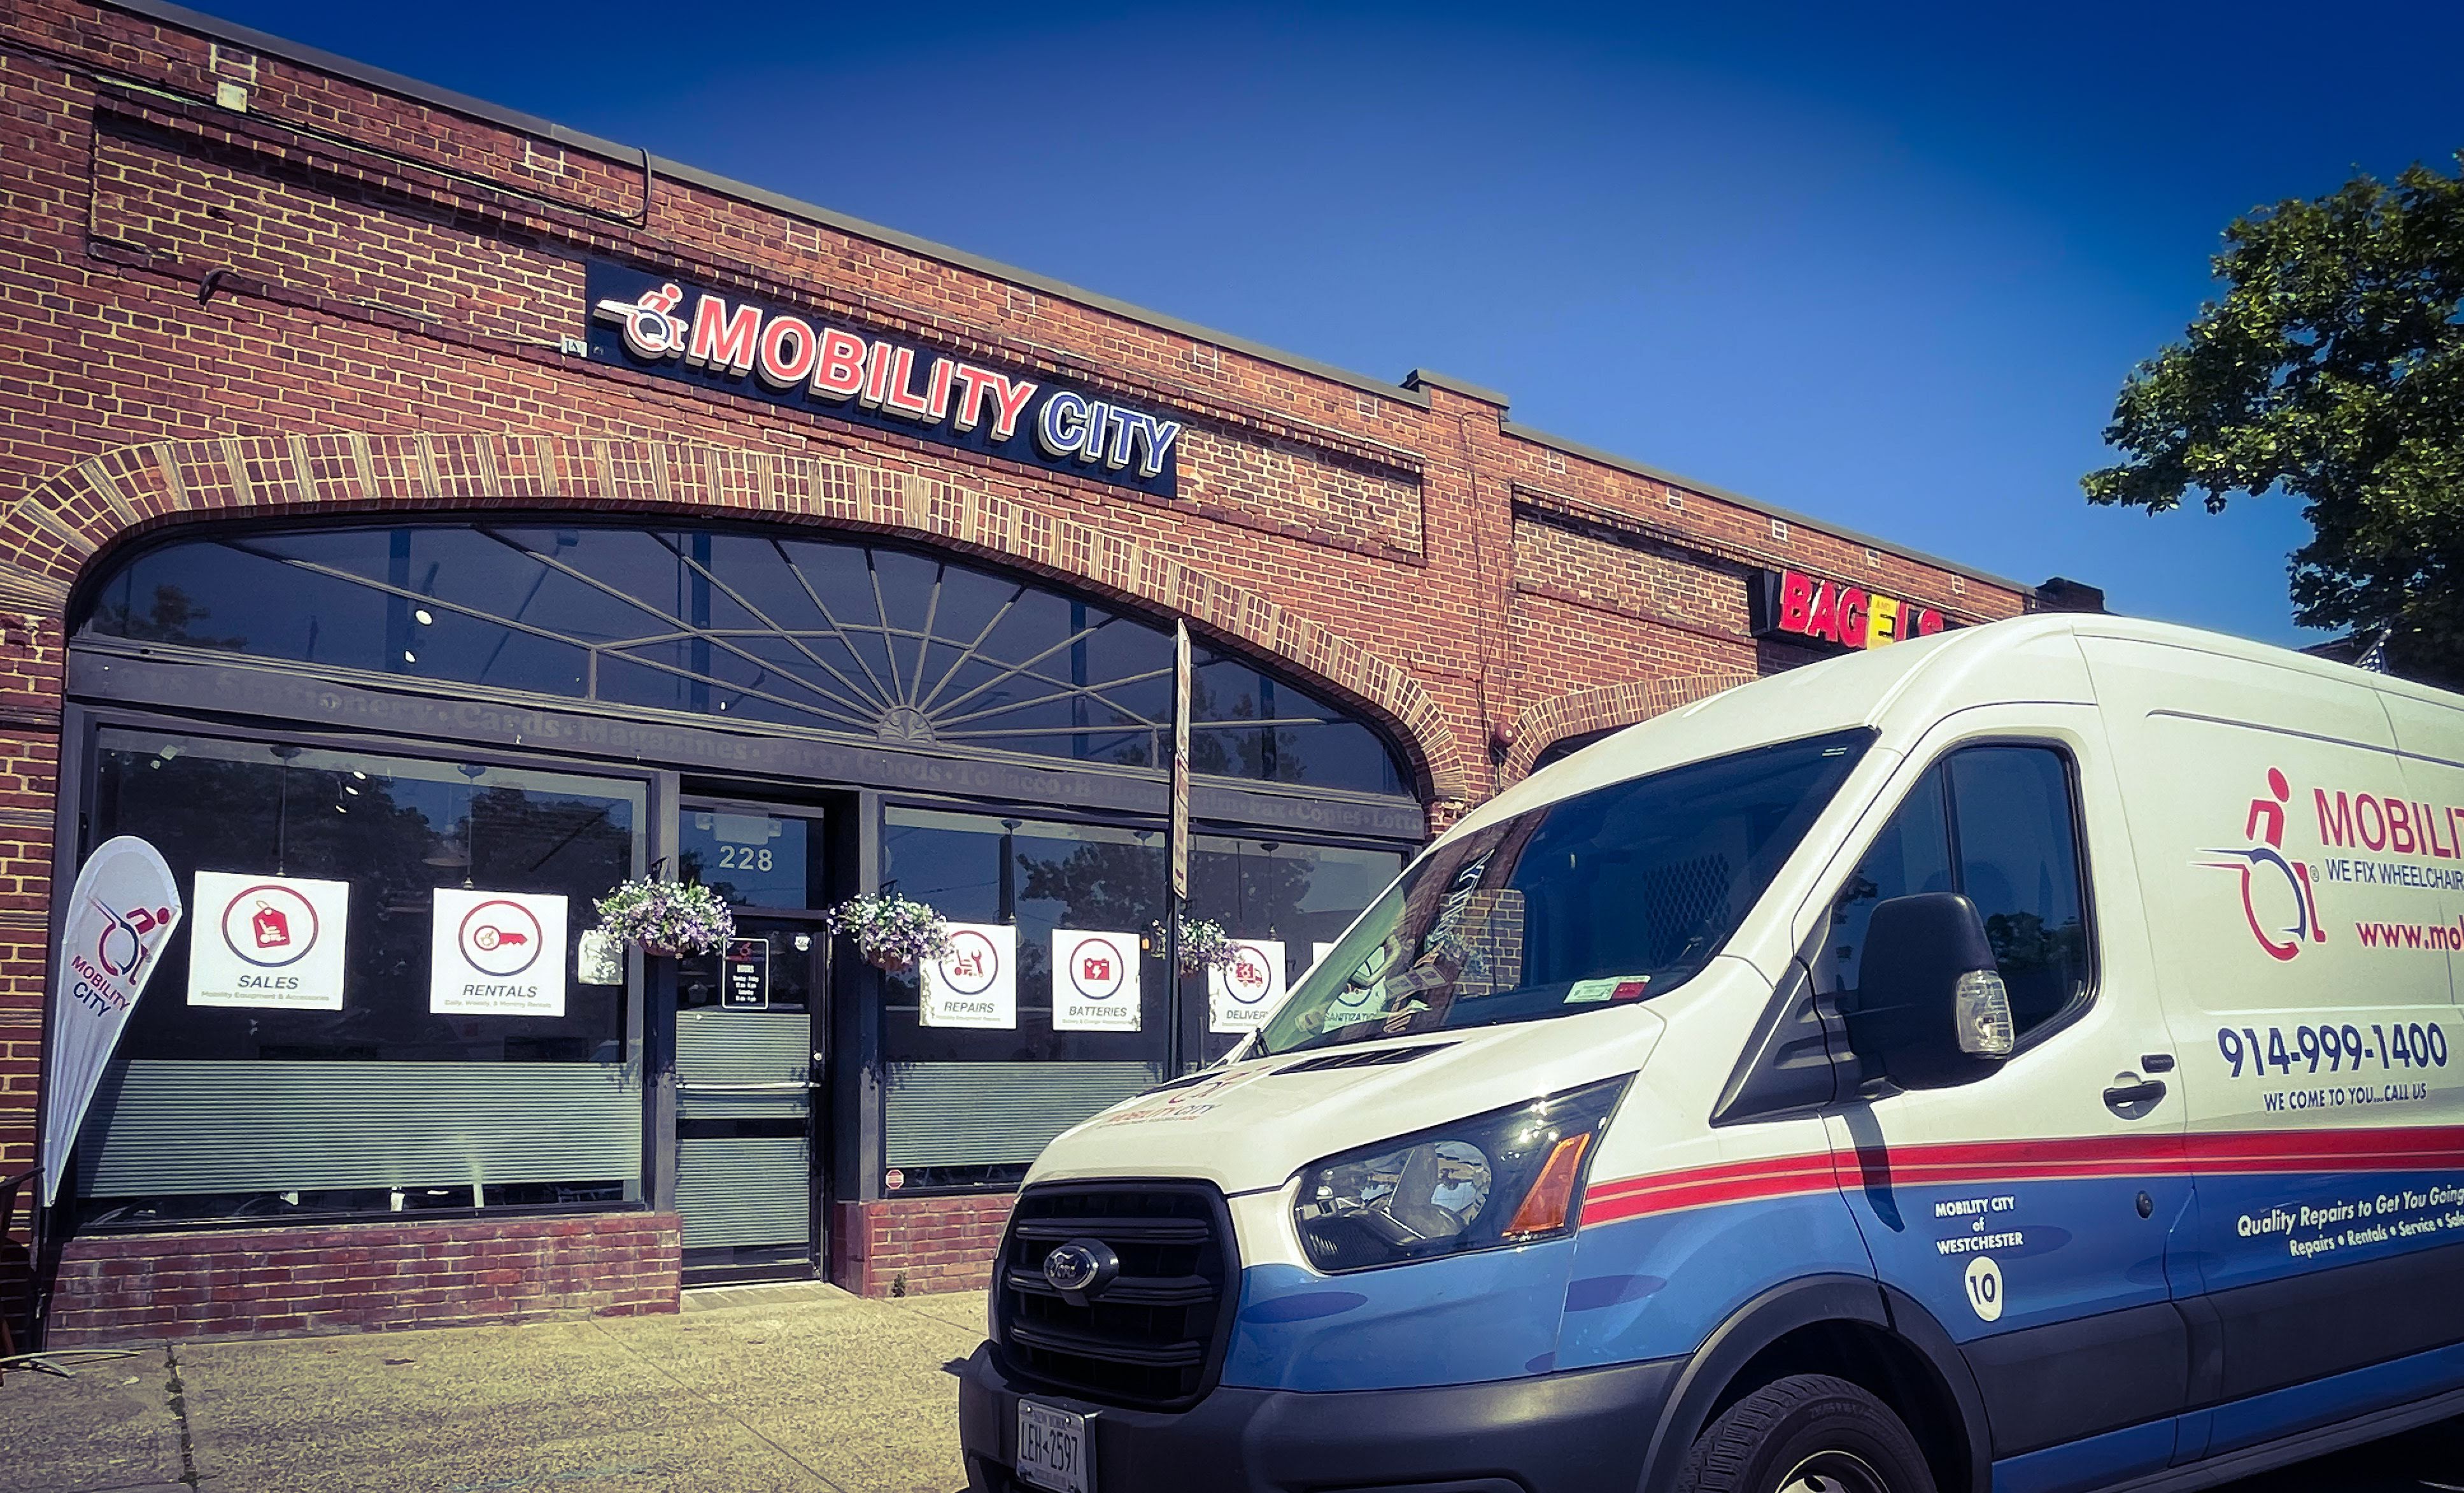 Photo of Mobility City of Westchester showroom frontage and Van, 228 E. Hartsdale Ave, Hartsdale, NY 10530,  914-999-1400